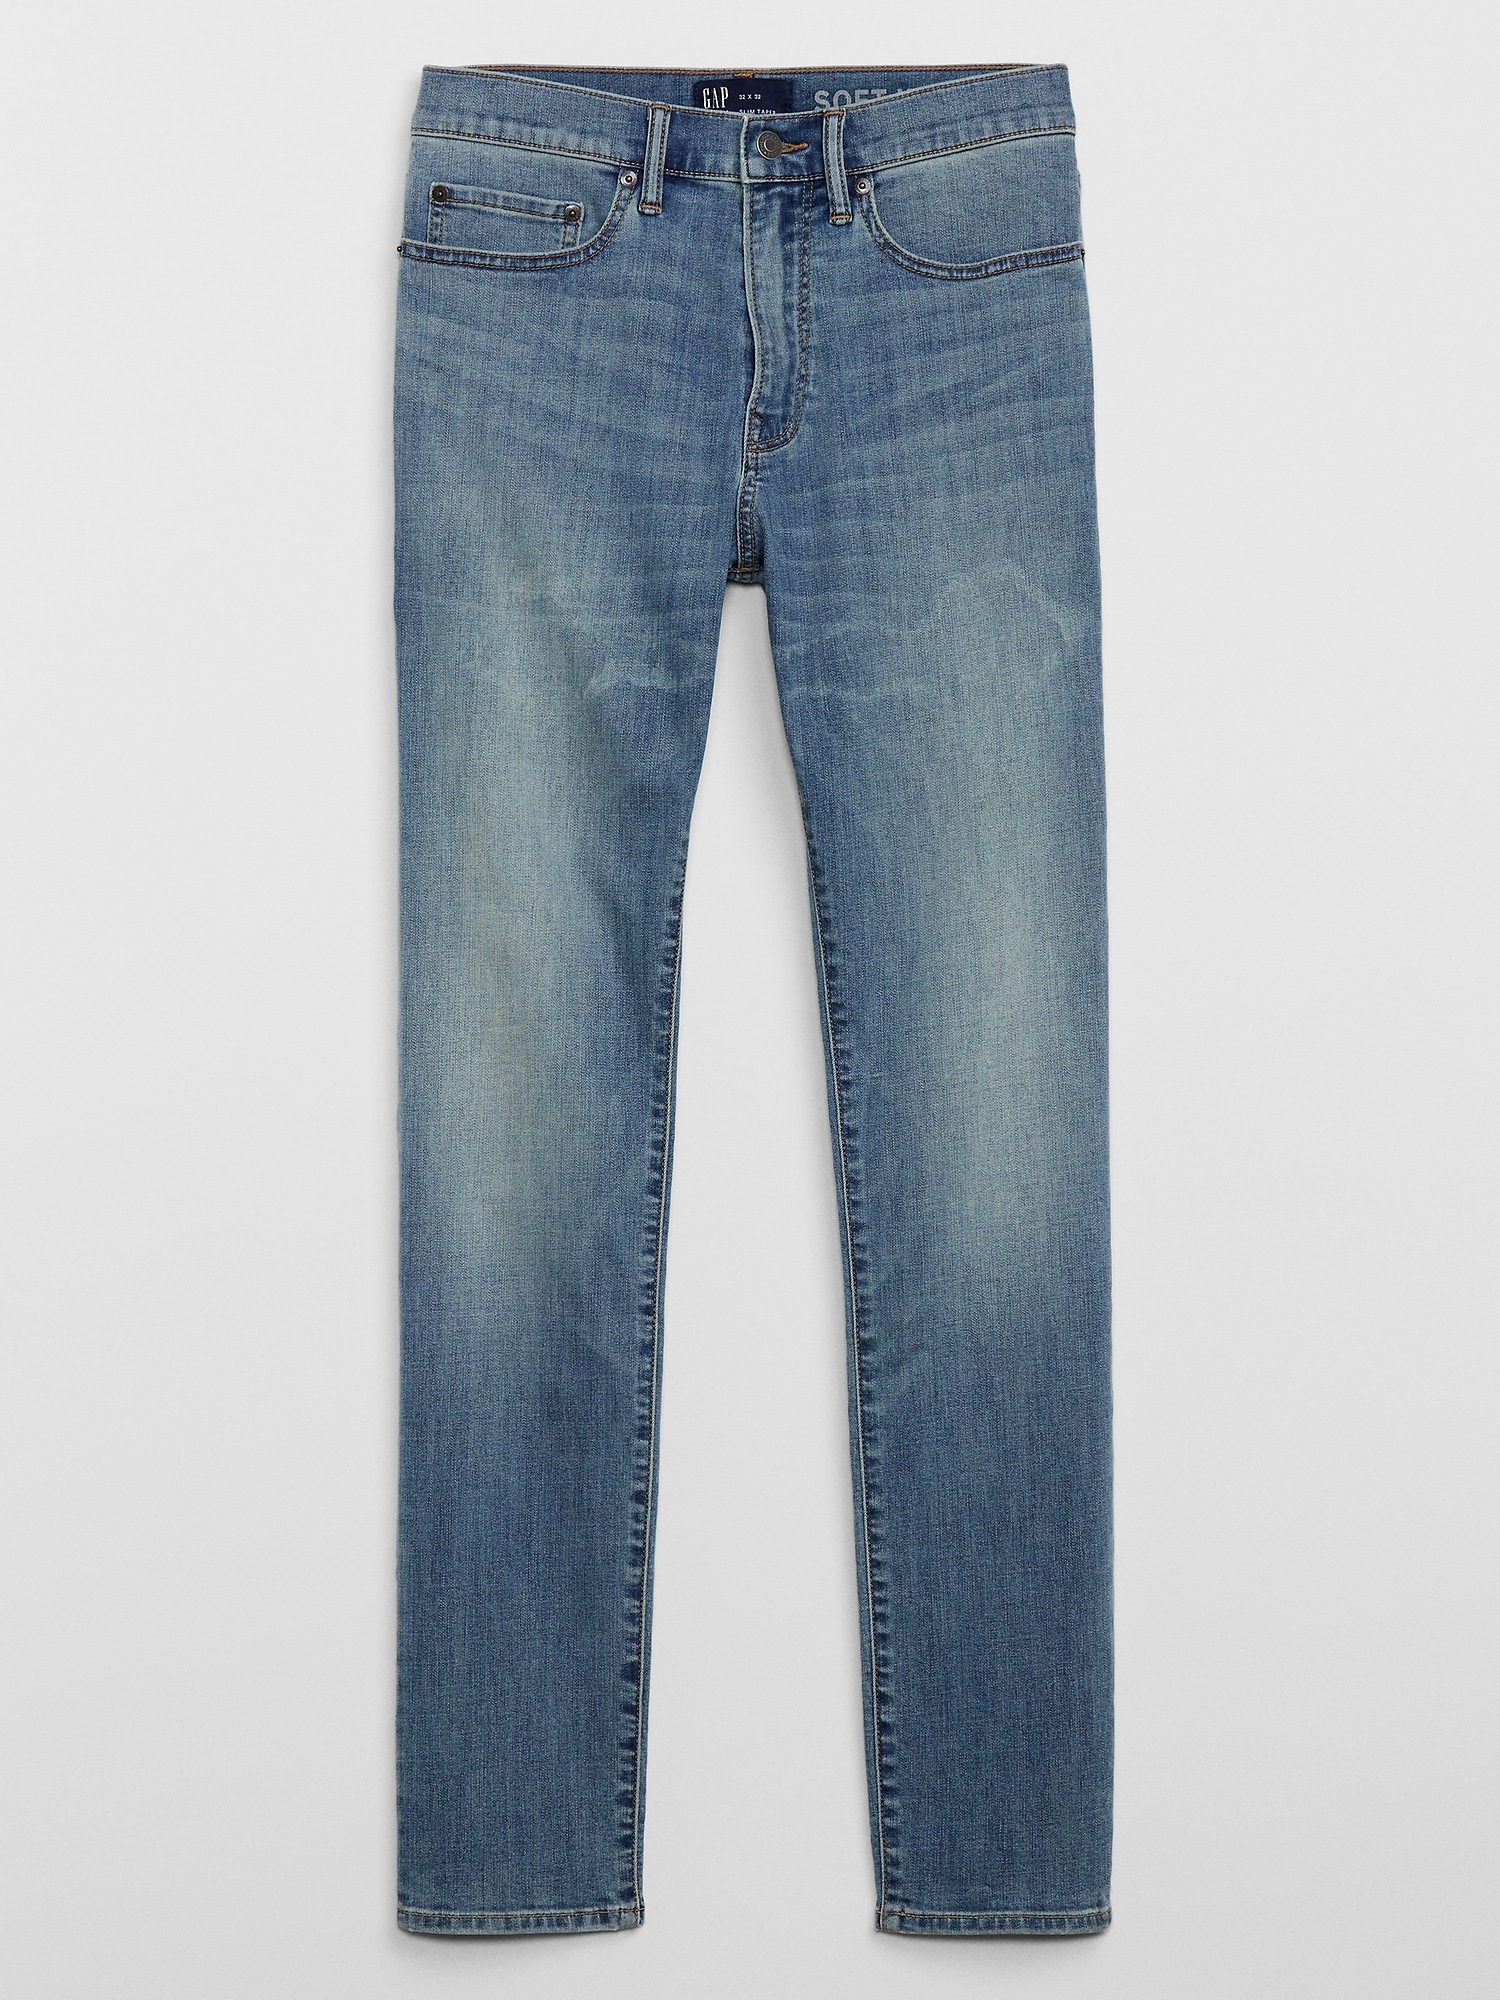 Soft Wear Slim Taper Jeans with Washwell | Gap Factory